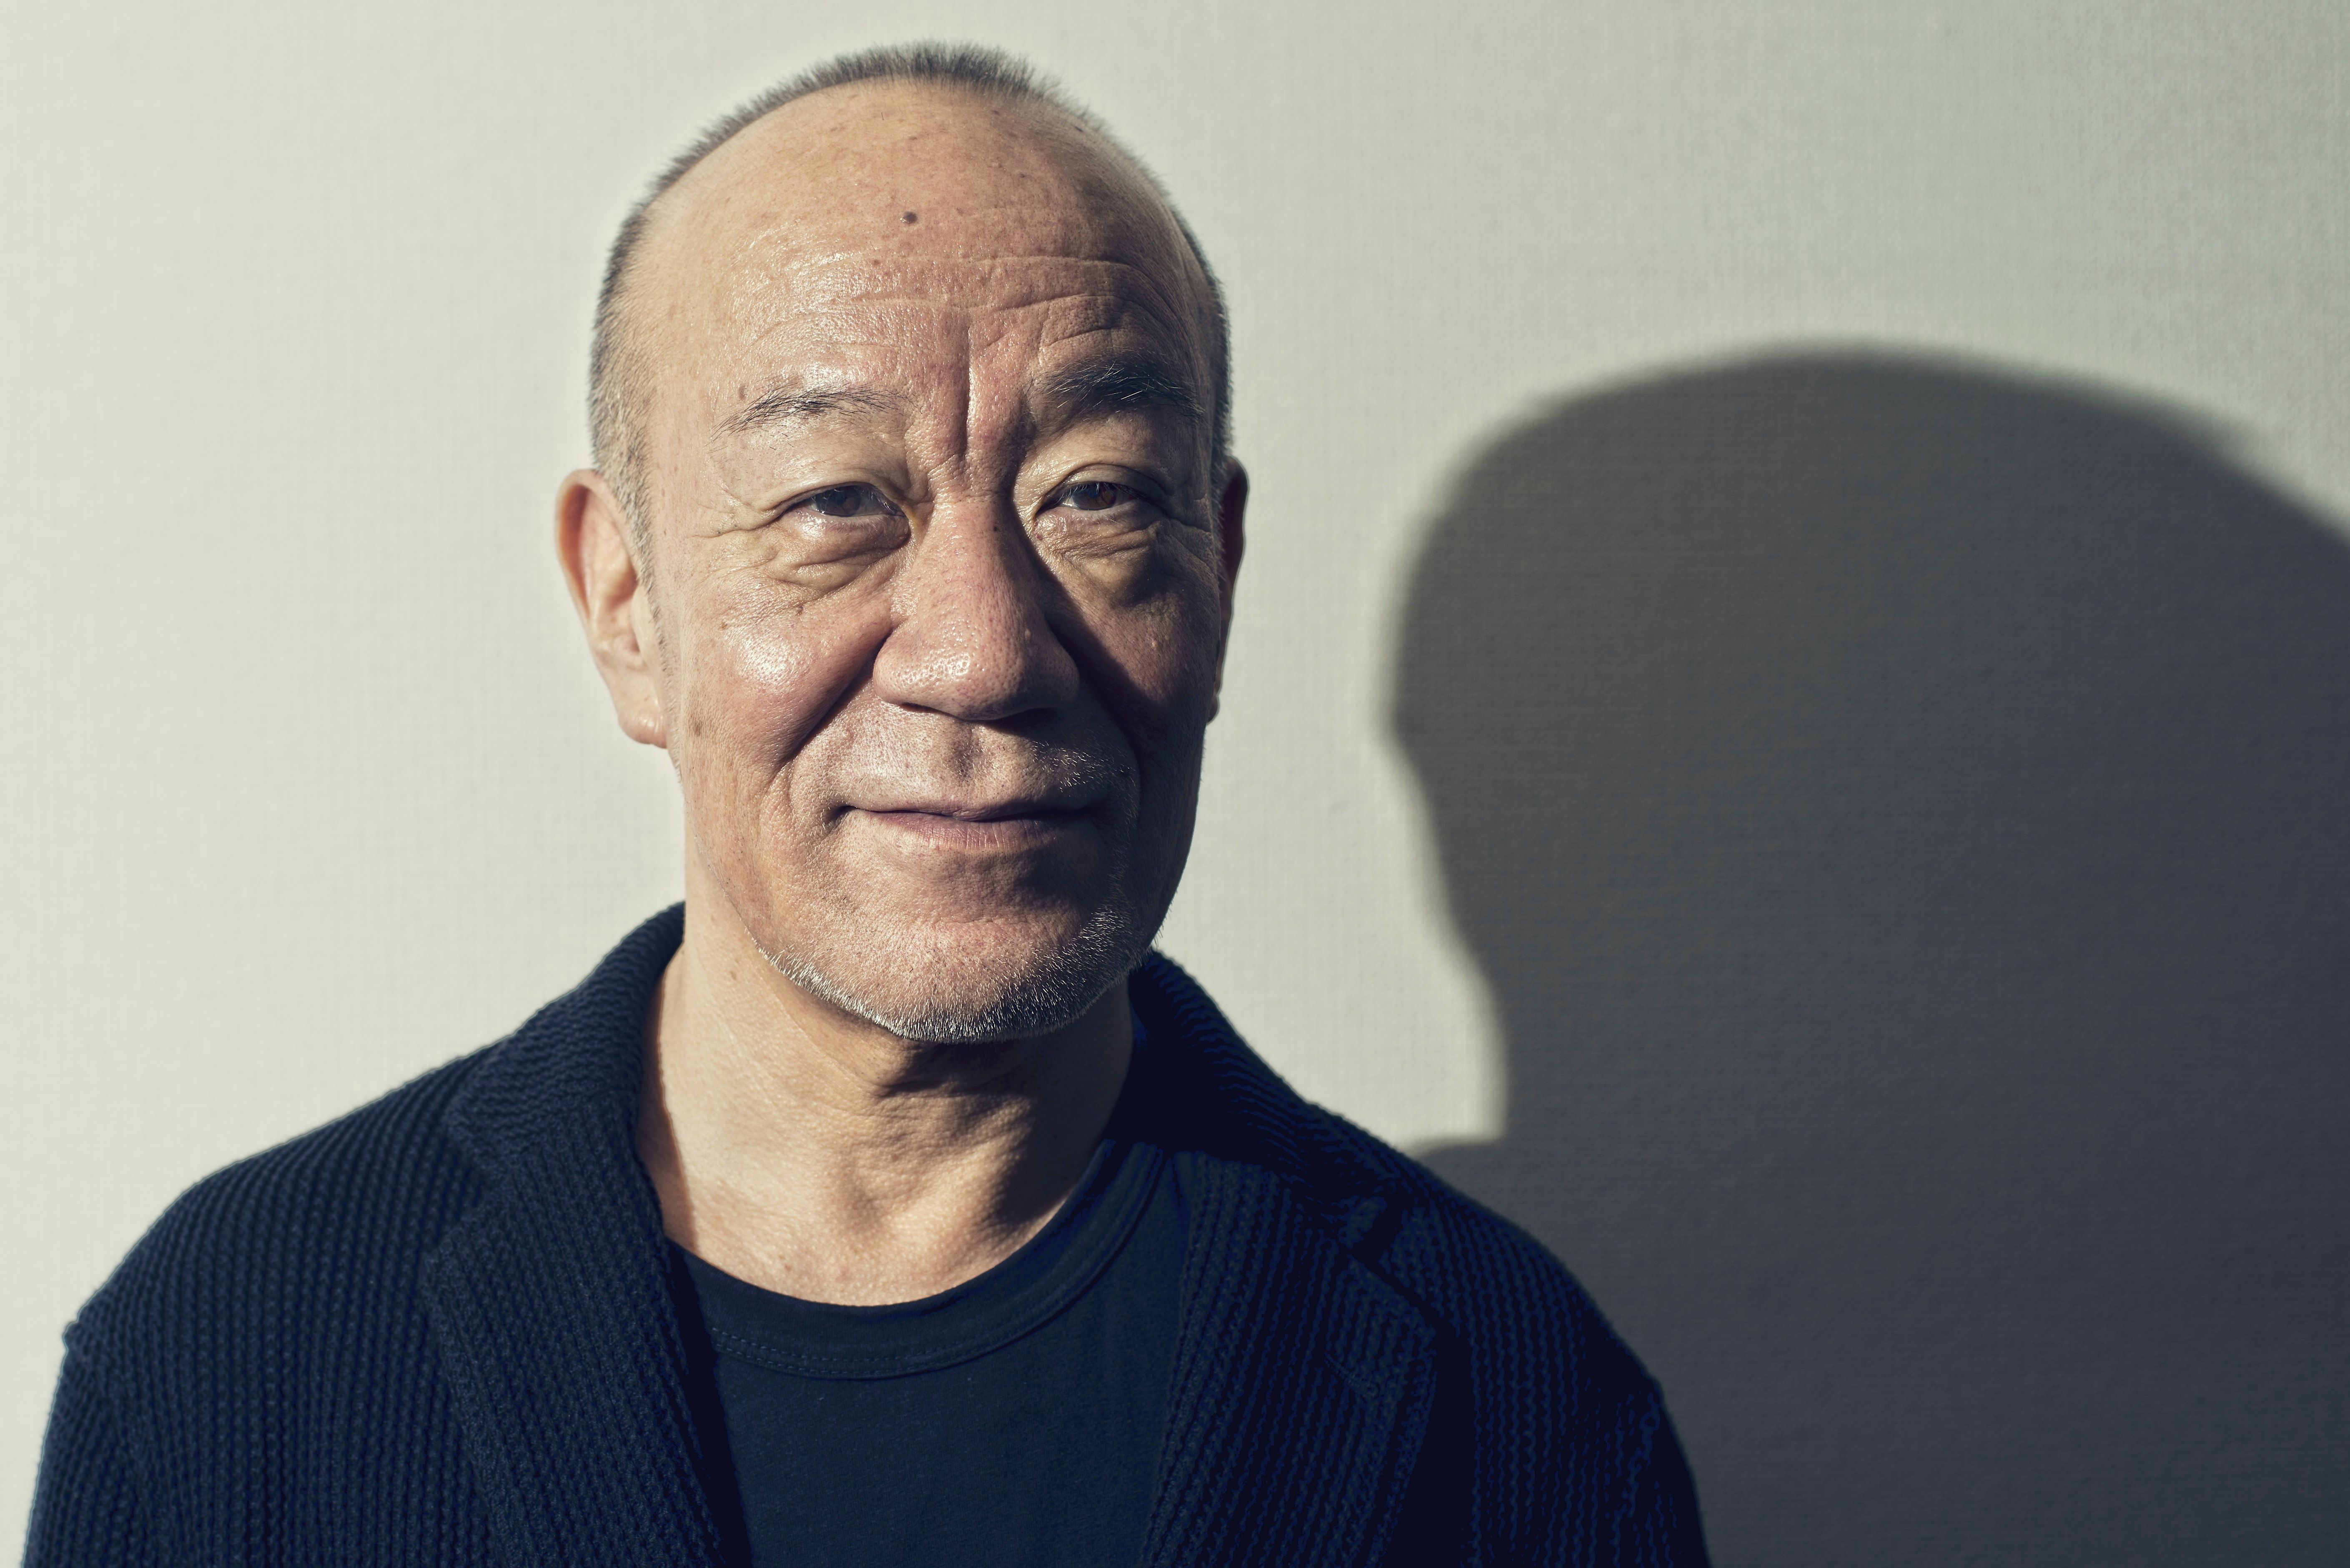 Pictures of Joe Hisaishi